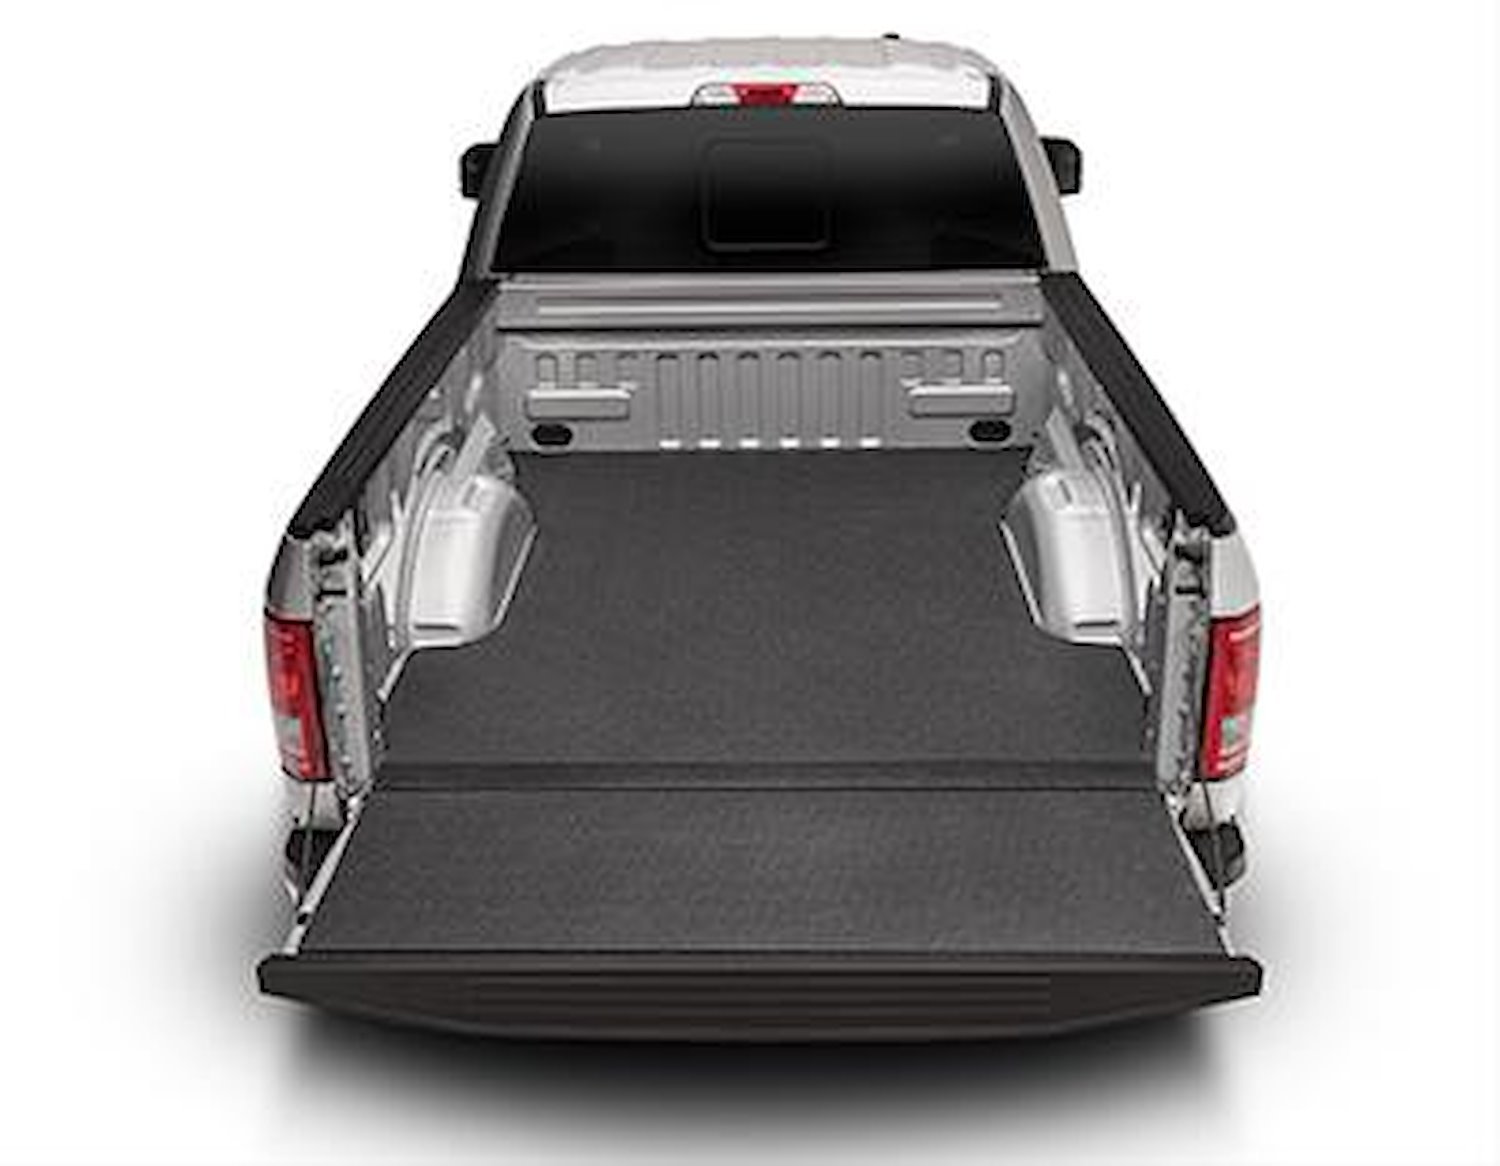 IMY05SBS IMPACT BEDMAT FOR SPRAY-IN OR NO BED LINER 05+ TOYOTA TACOMA 6' BED